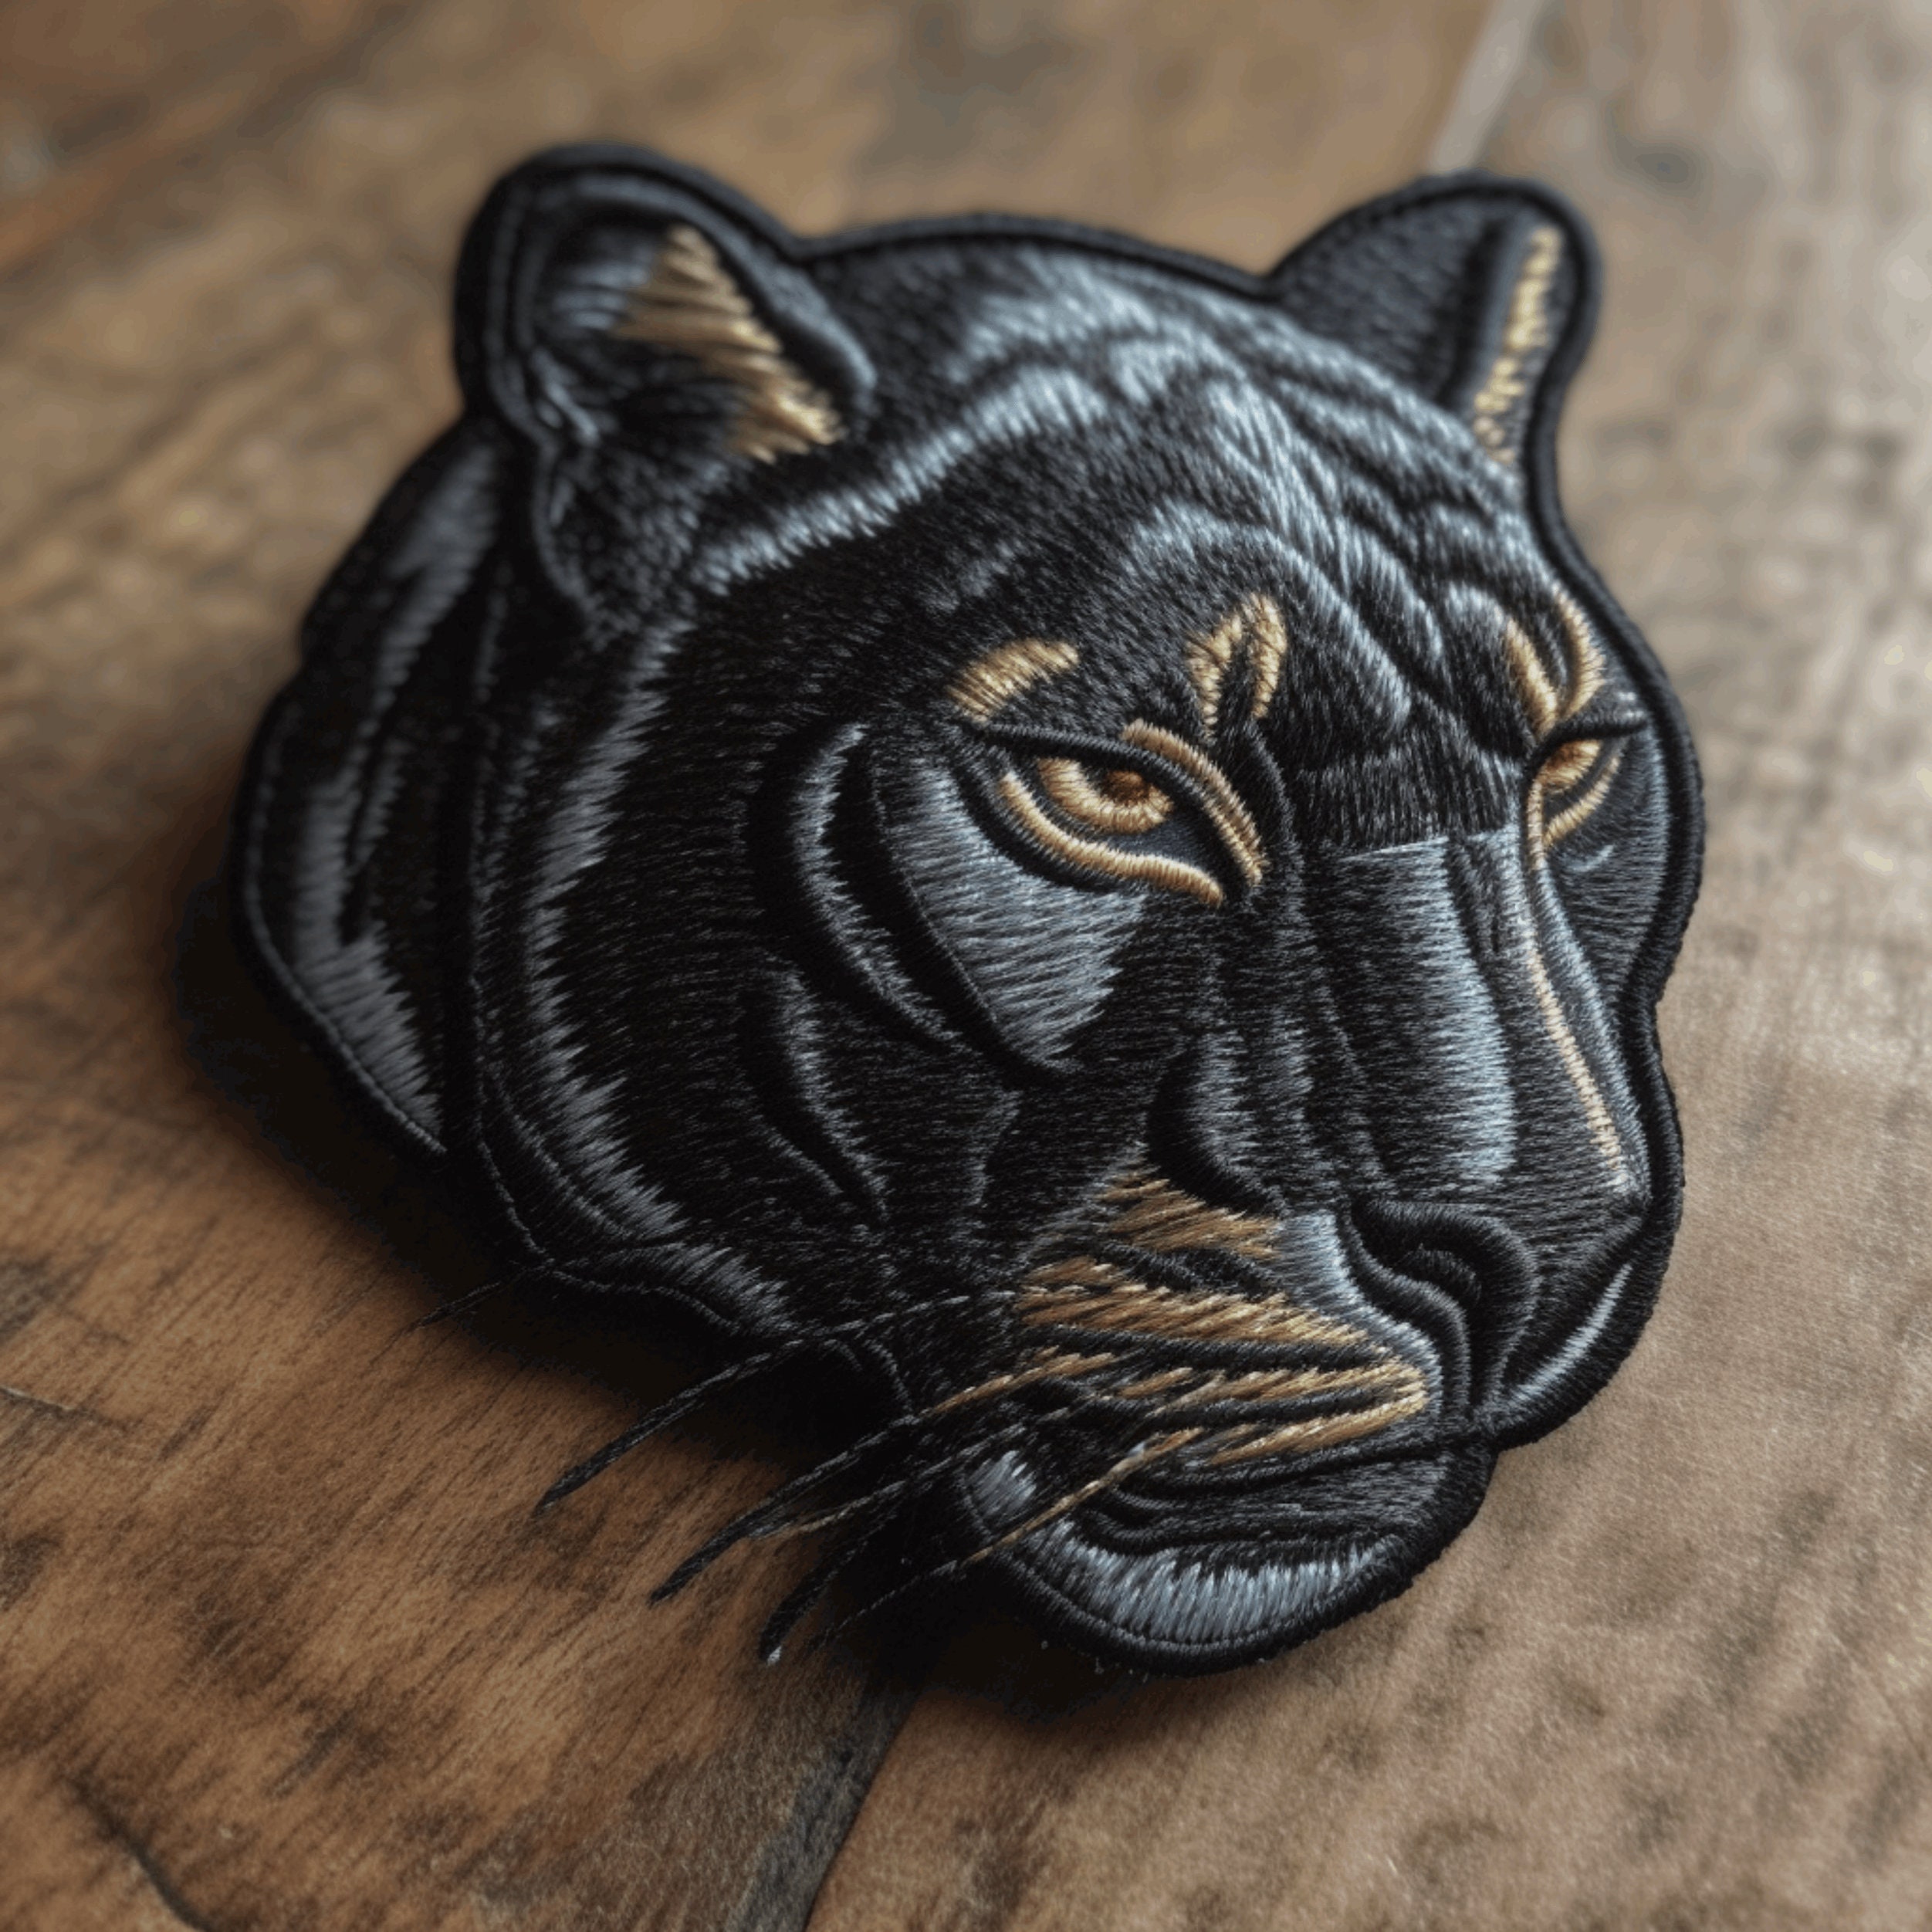 Black Power - Black Panthers Embroidered Iron-on Patch – jidesignsart